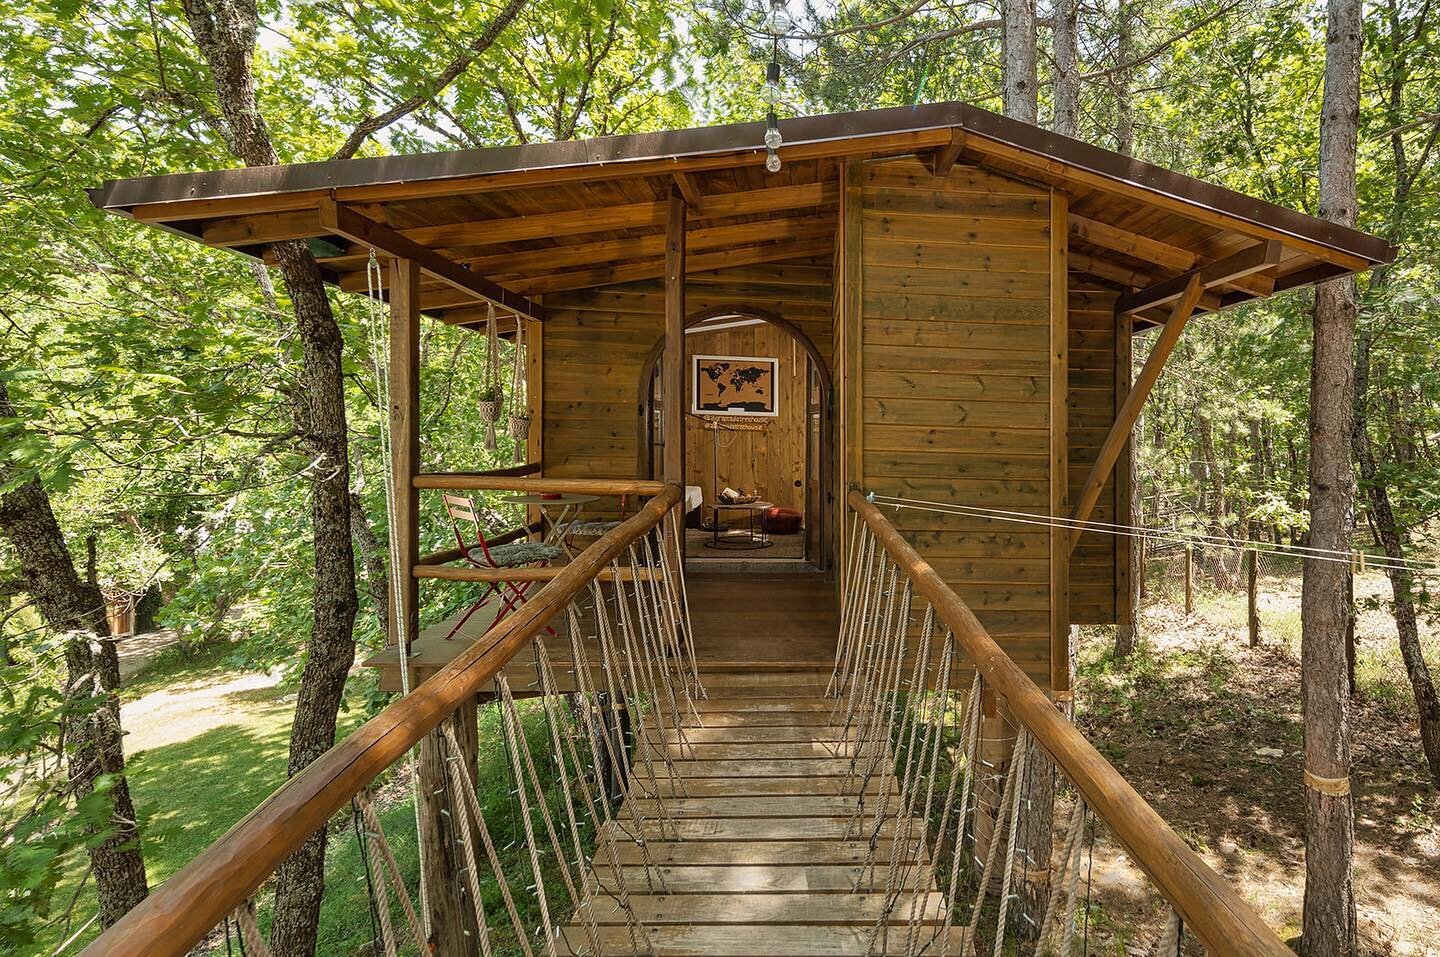 The closest you&rsquo;ve ever felt to nature while strolling on a bridge 🌳🥾🌲
.
.
.
📸 @lefteris_kossaras 
@two_clicks_photography 
.
.
.
#agramada #agramadatreehouse ##uniquehotels #treehousehotel #treehouse #bestgreekhotels #getaway #beautifuldes